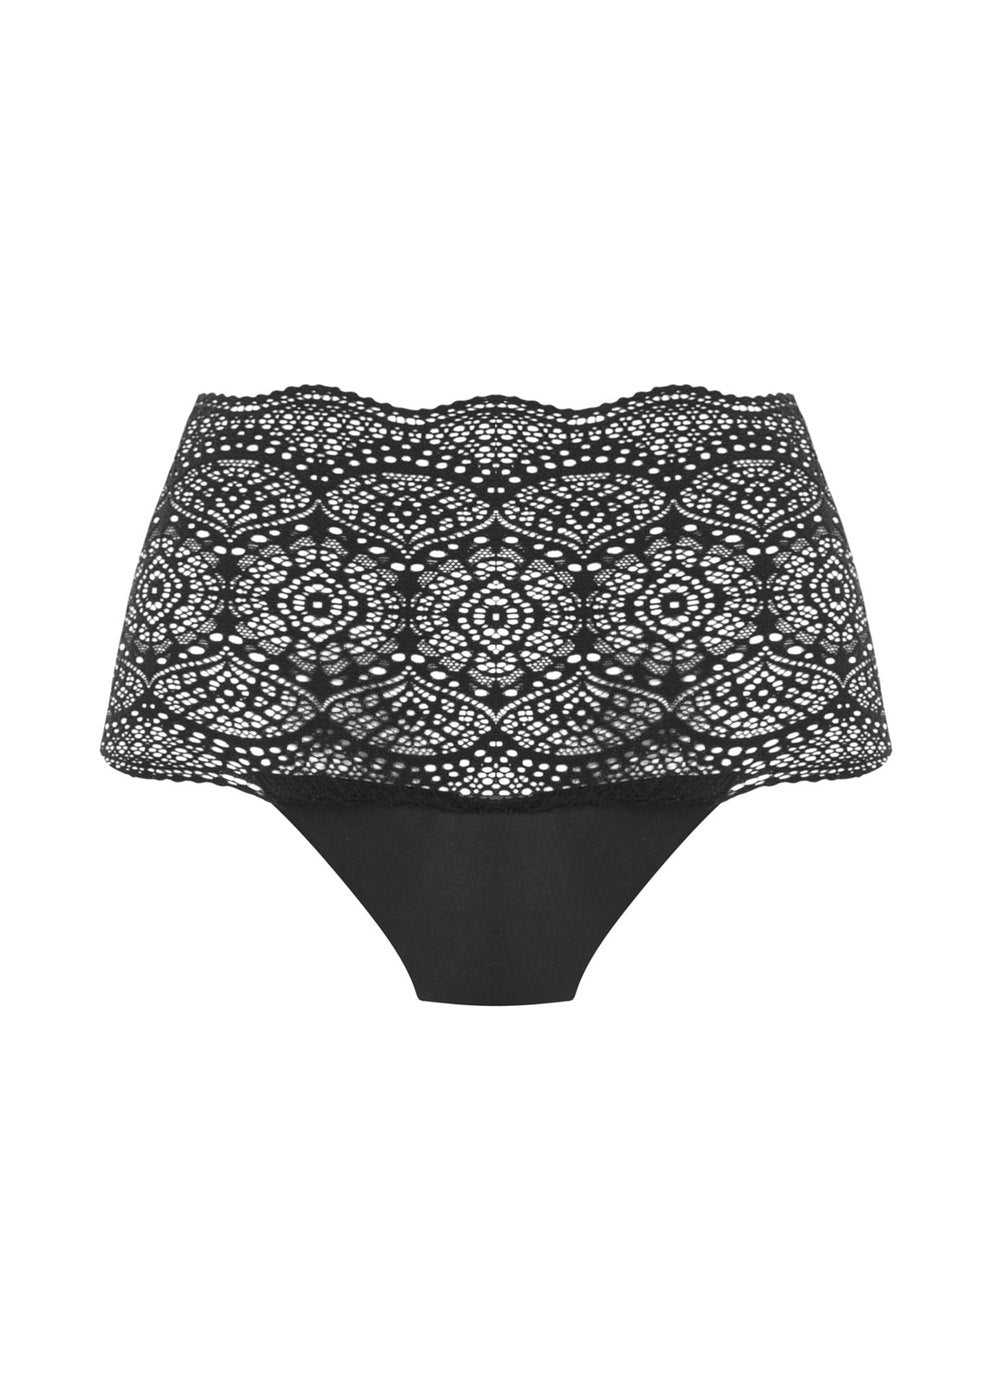 Lace Ease Invisible Stretch Full Brief FL2330 BLK - Black